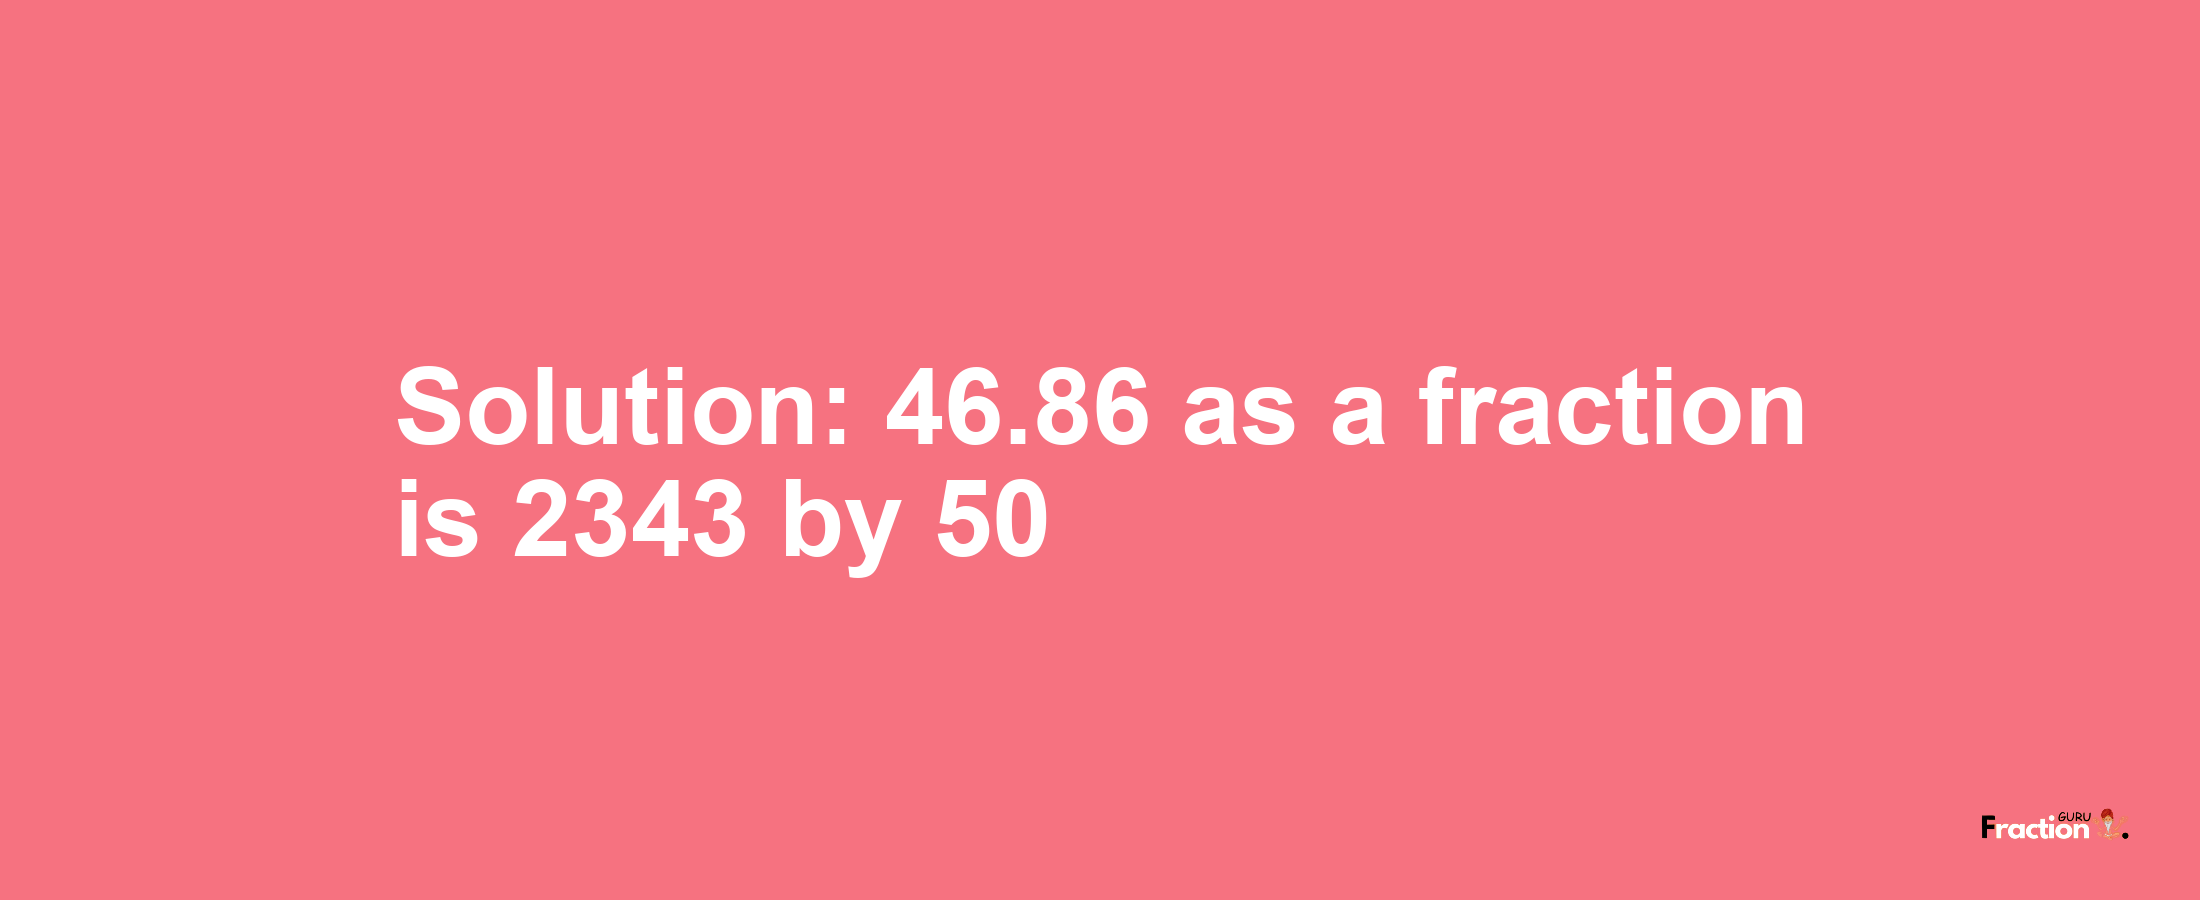 Solution:46.86 as a fraction is 2343/50